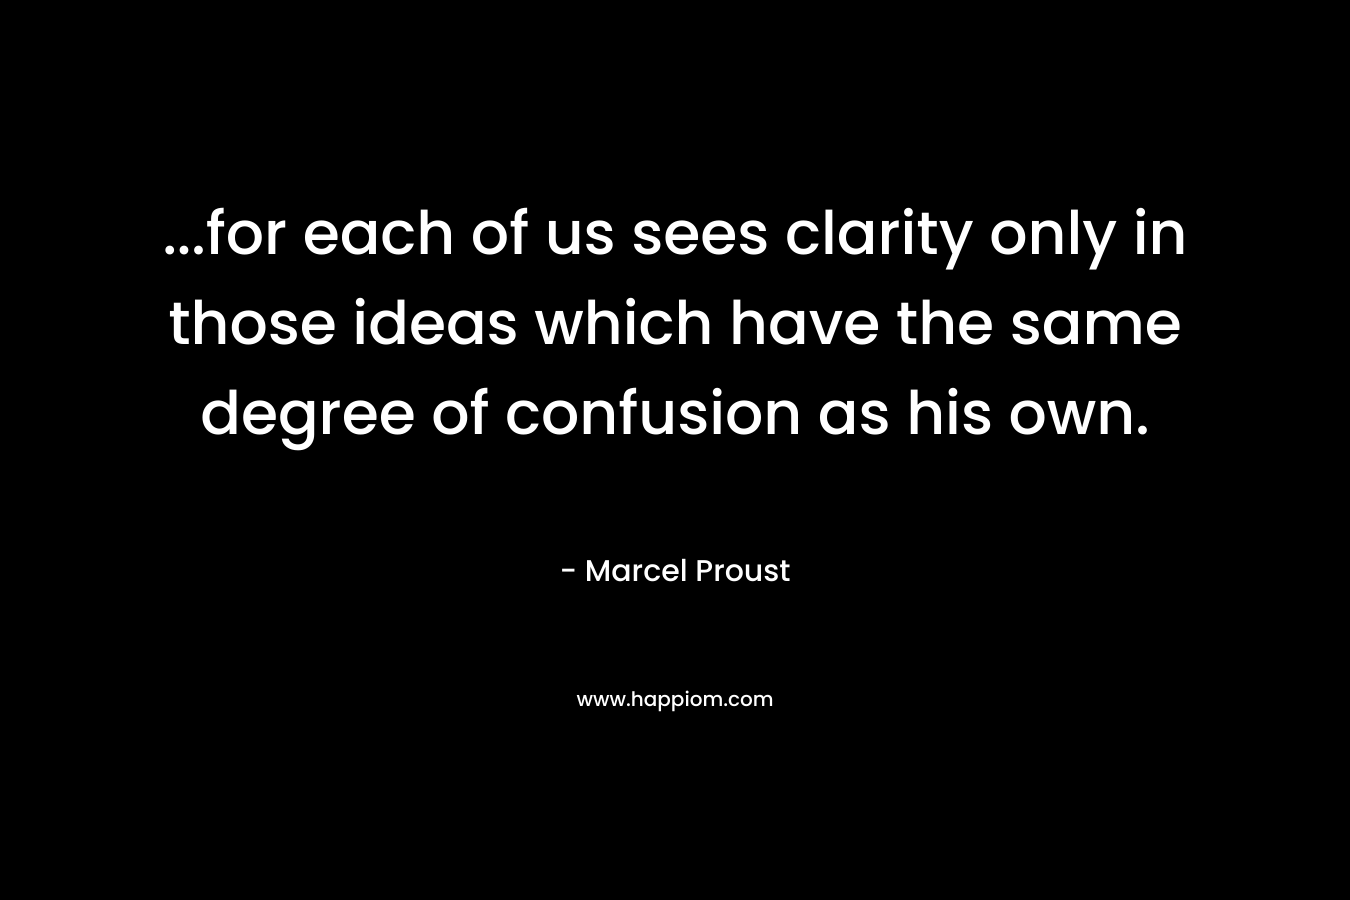 …for each of us sees clarity only in those ideas which have the same degree of confusion as his own. – Marcel Proust